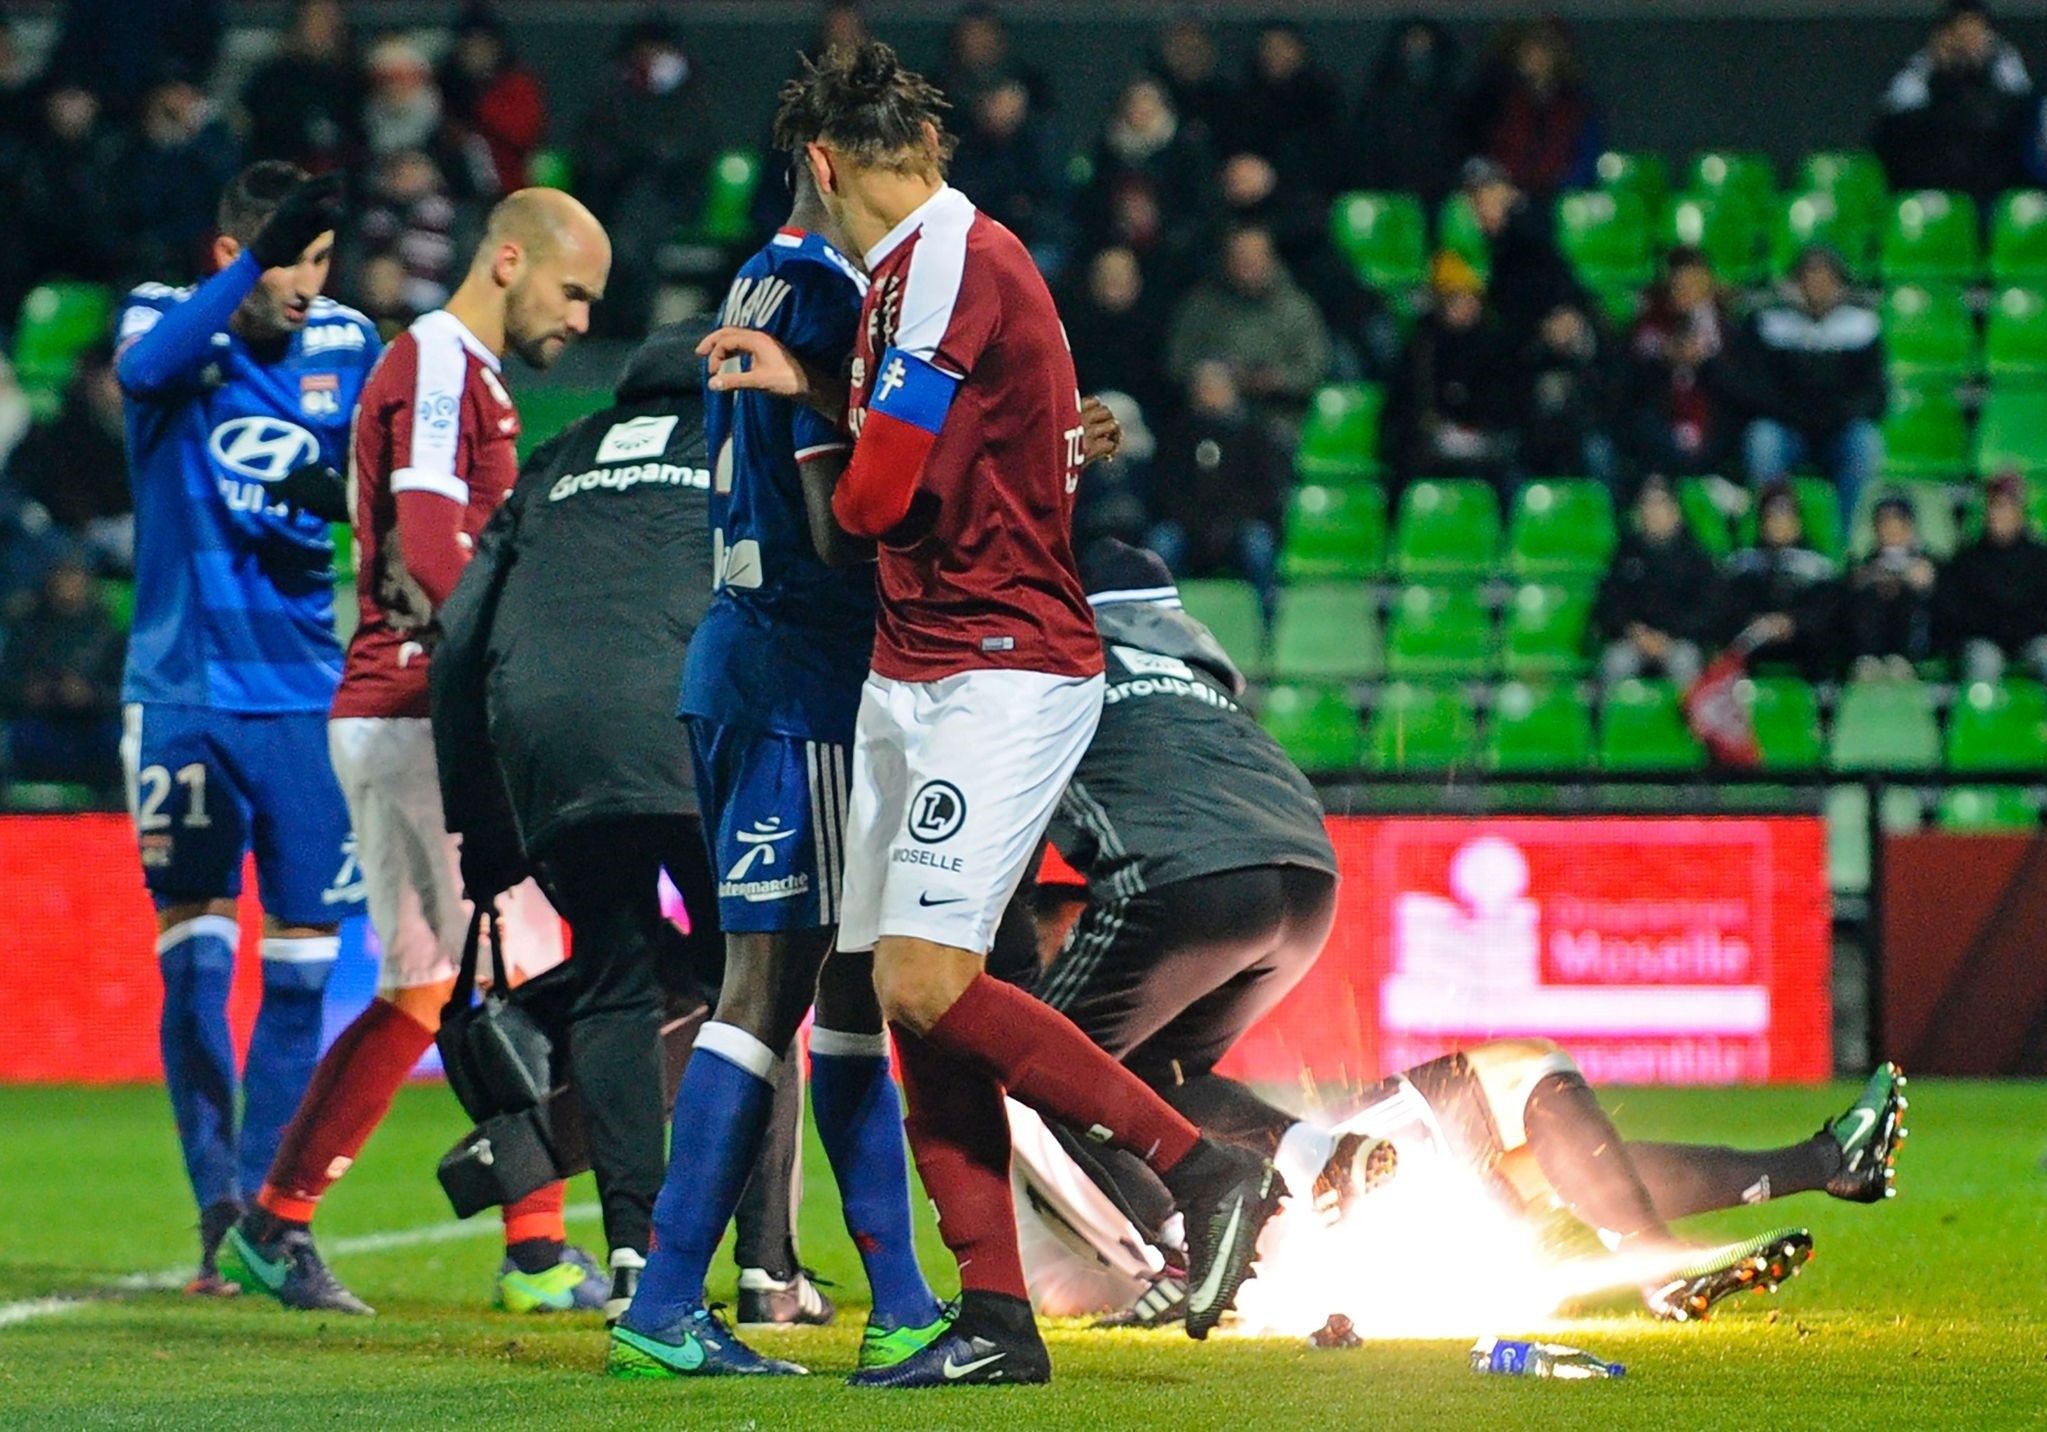 A firecracker explodes beside Lyon and Metz players during the French L1 football match between Metz (FCM) and Lyon (OL) on December 3, 2016. (AFP Photo)